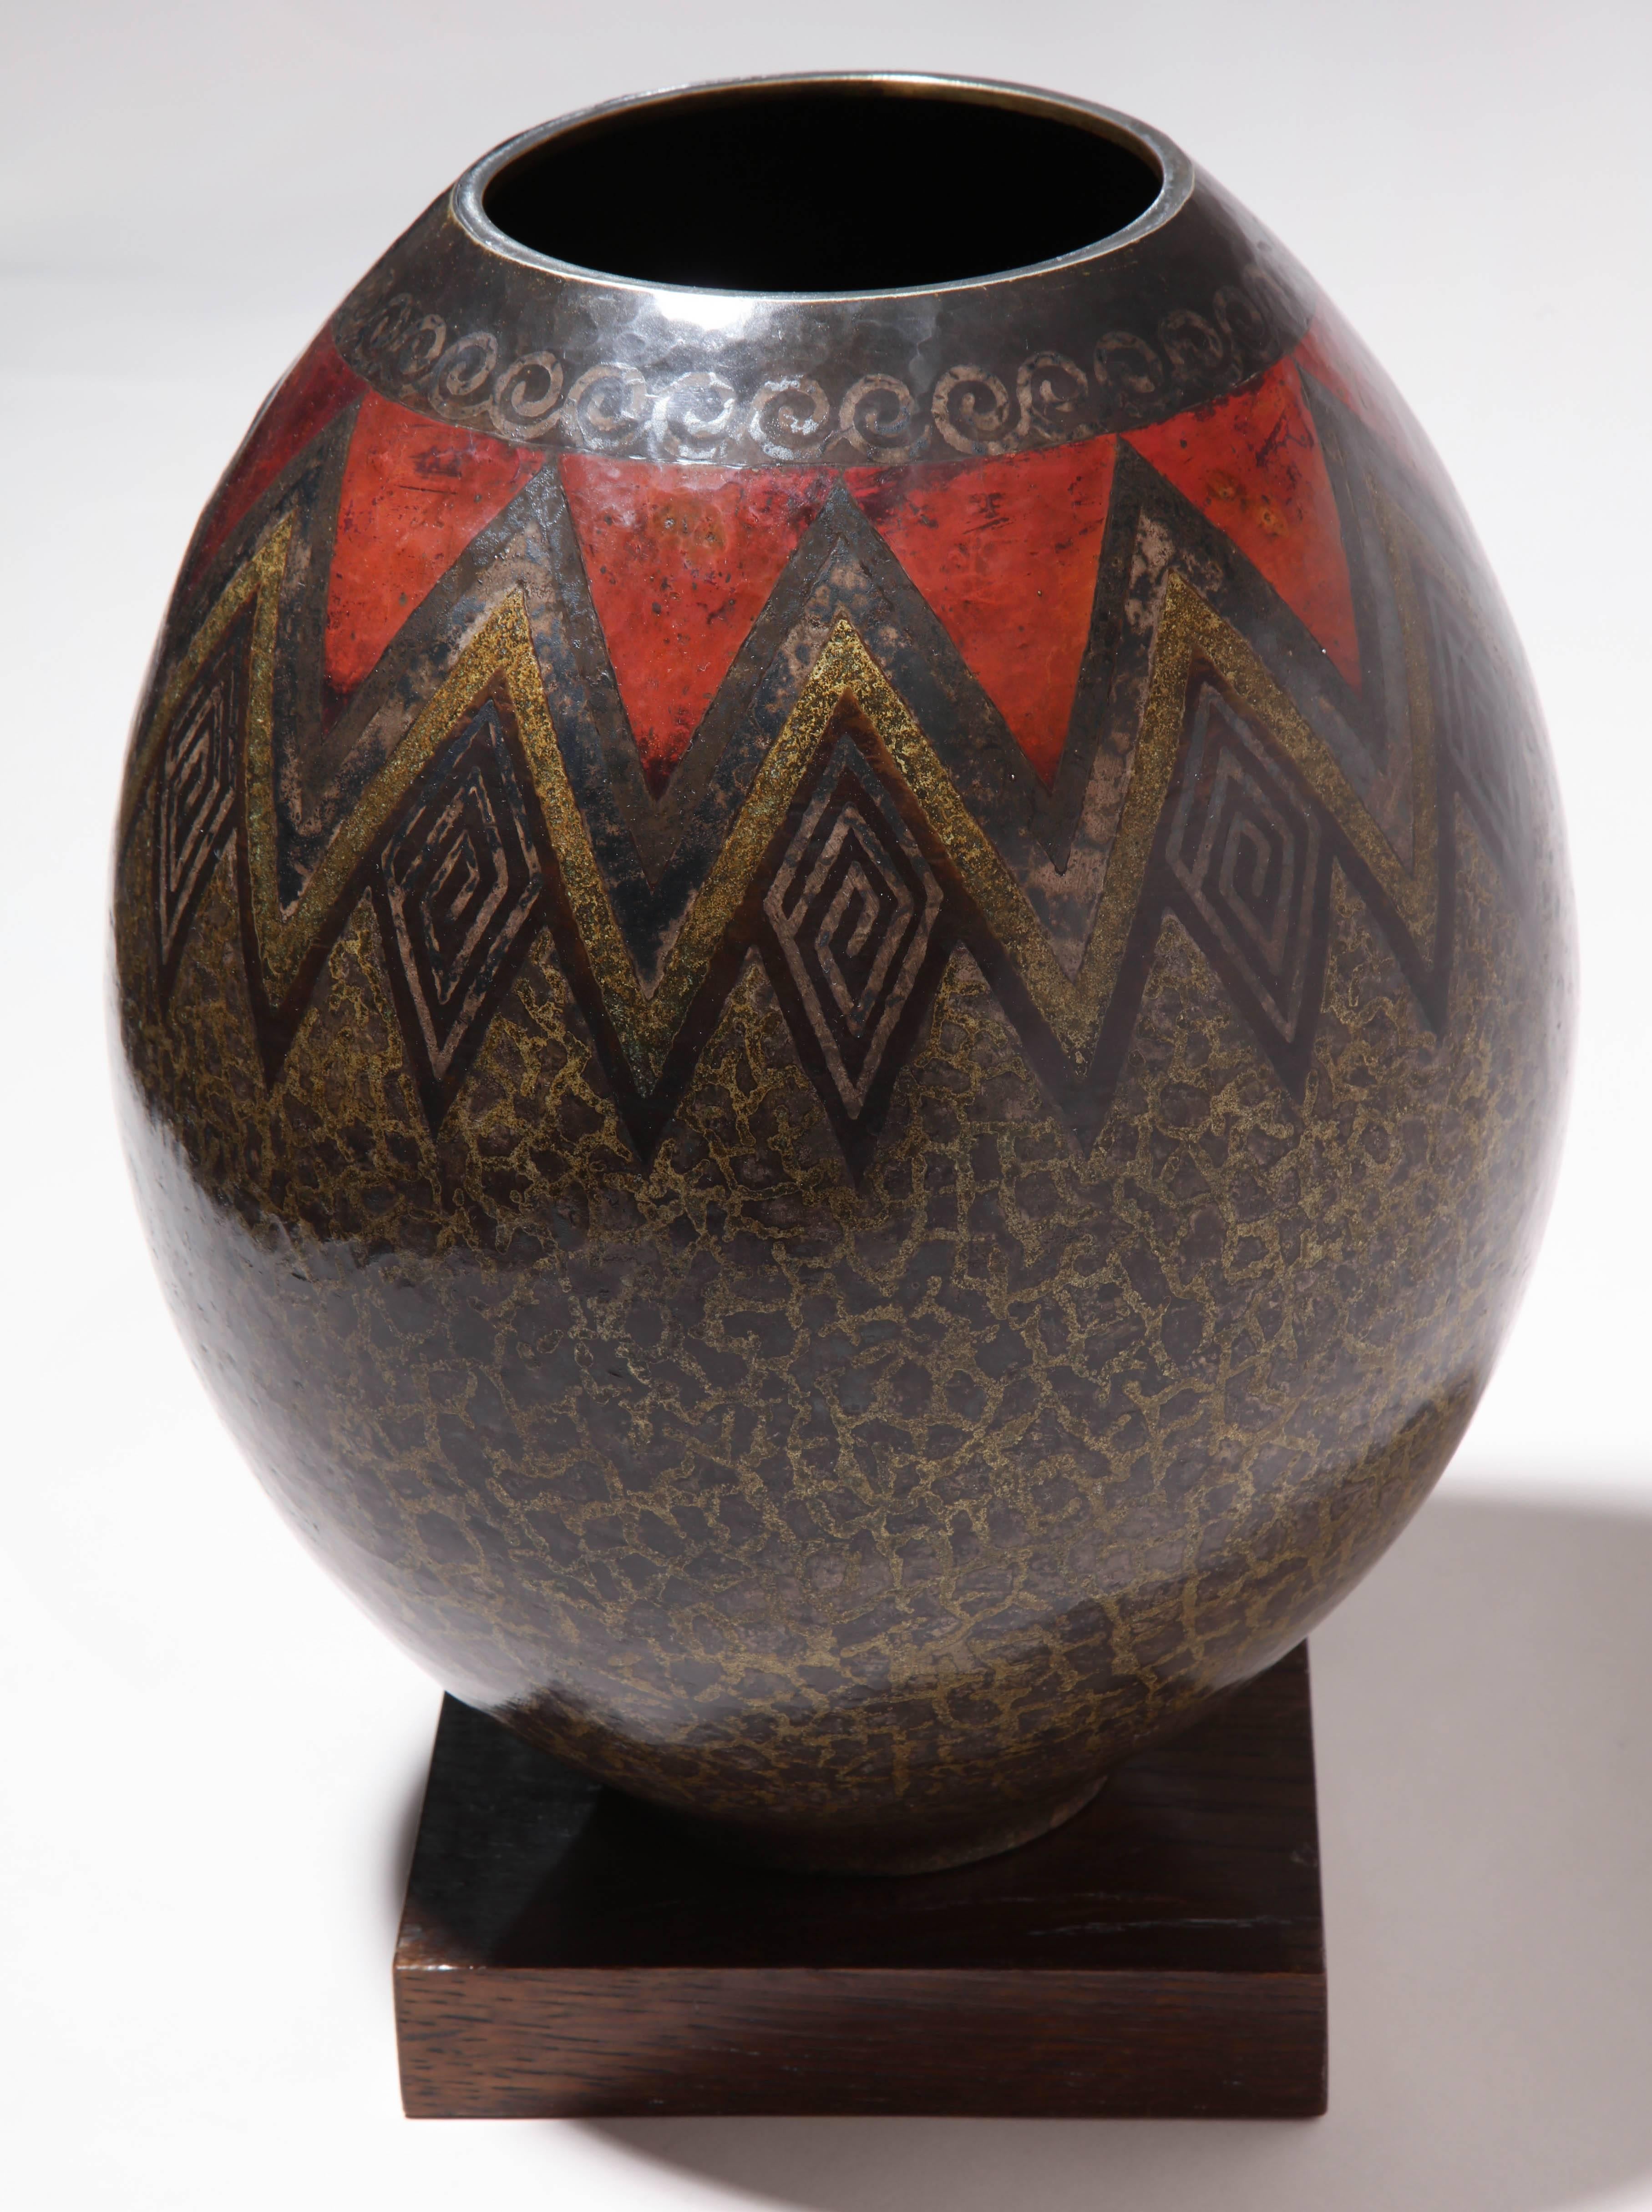 This exceptional and important ovoid vase is decorated with fired patina and silver inlays on a background, also patinated with fire, red and anthracite in the upper part and vermiculated in the lower part. It sits on its original oak base, probably